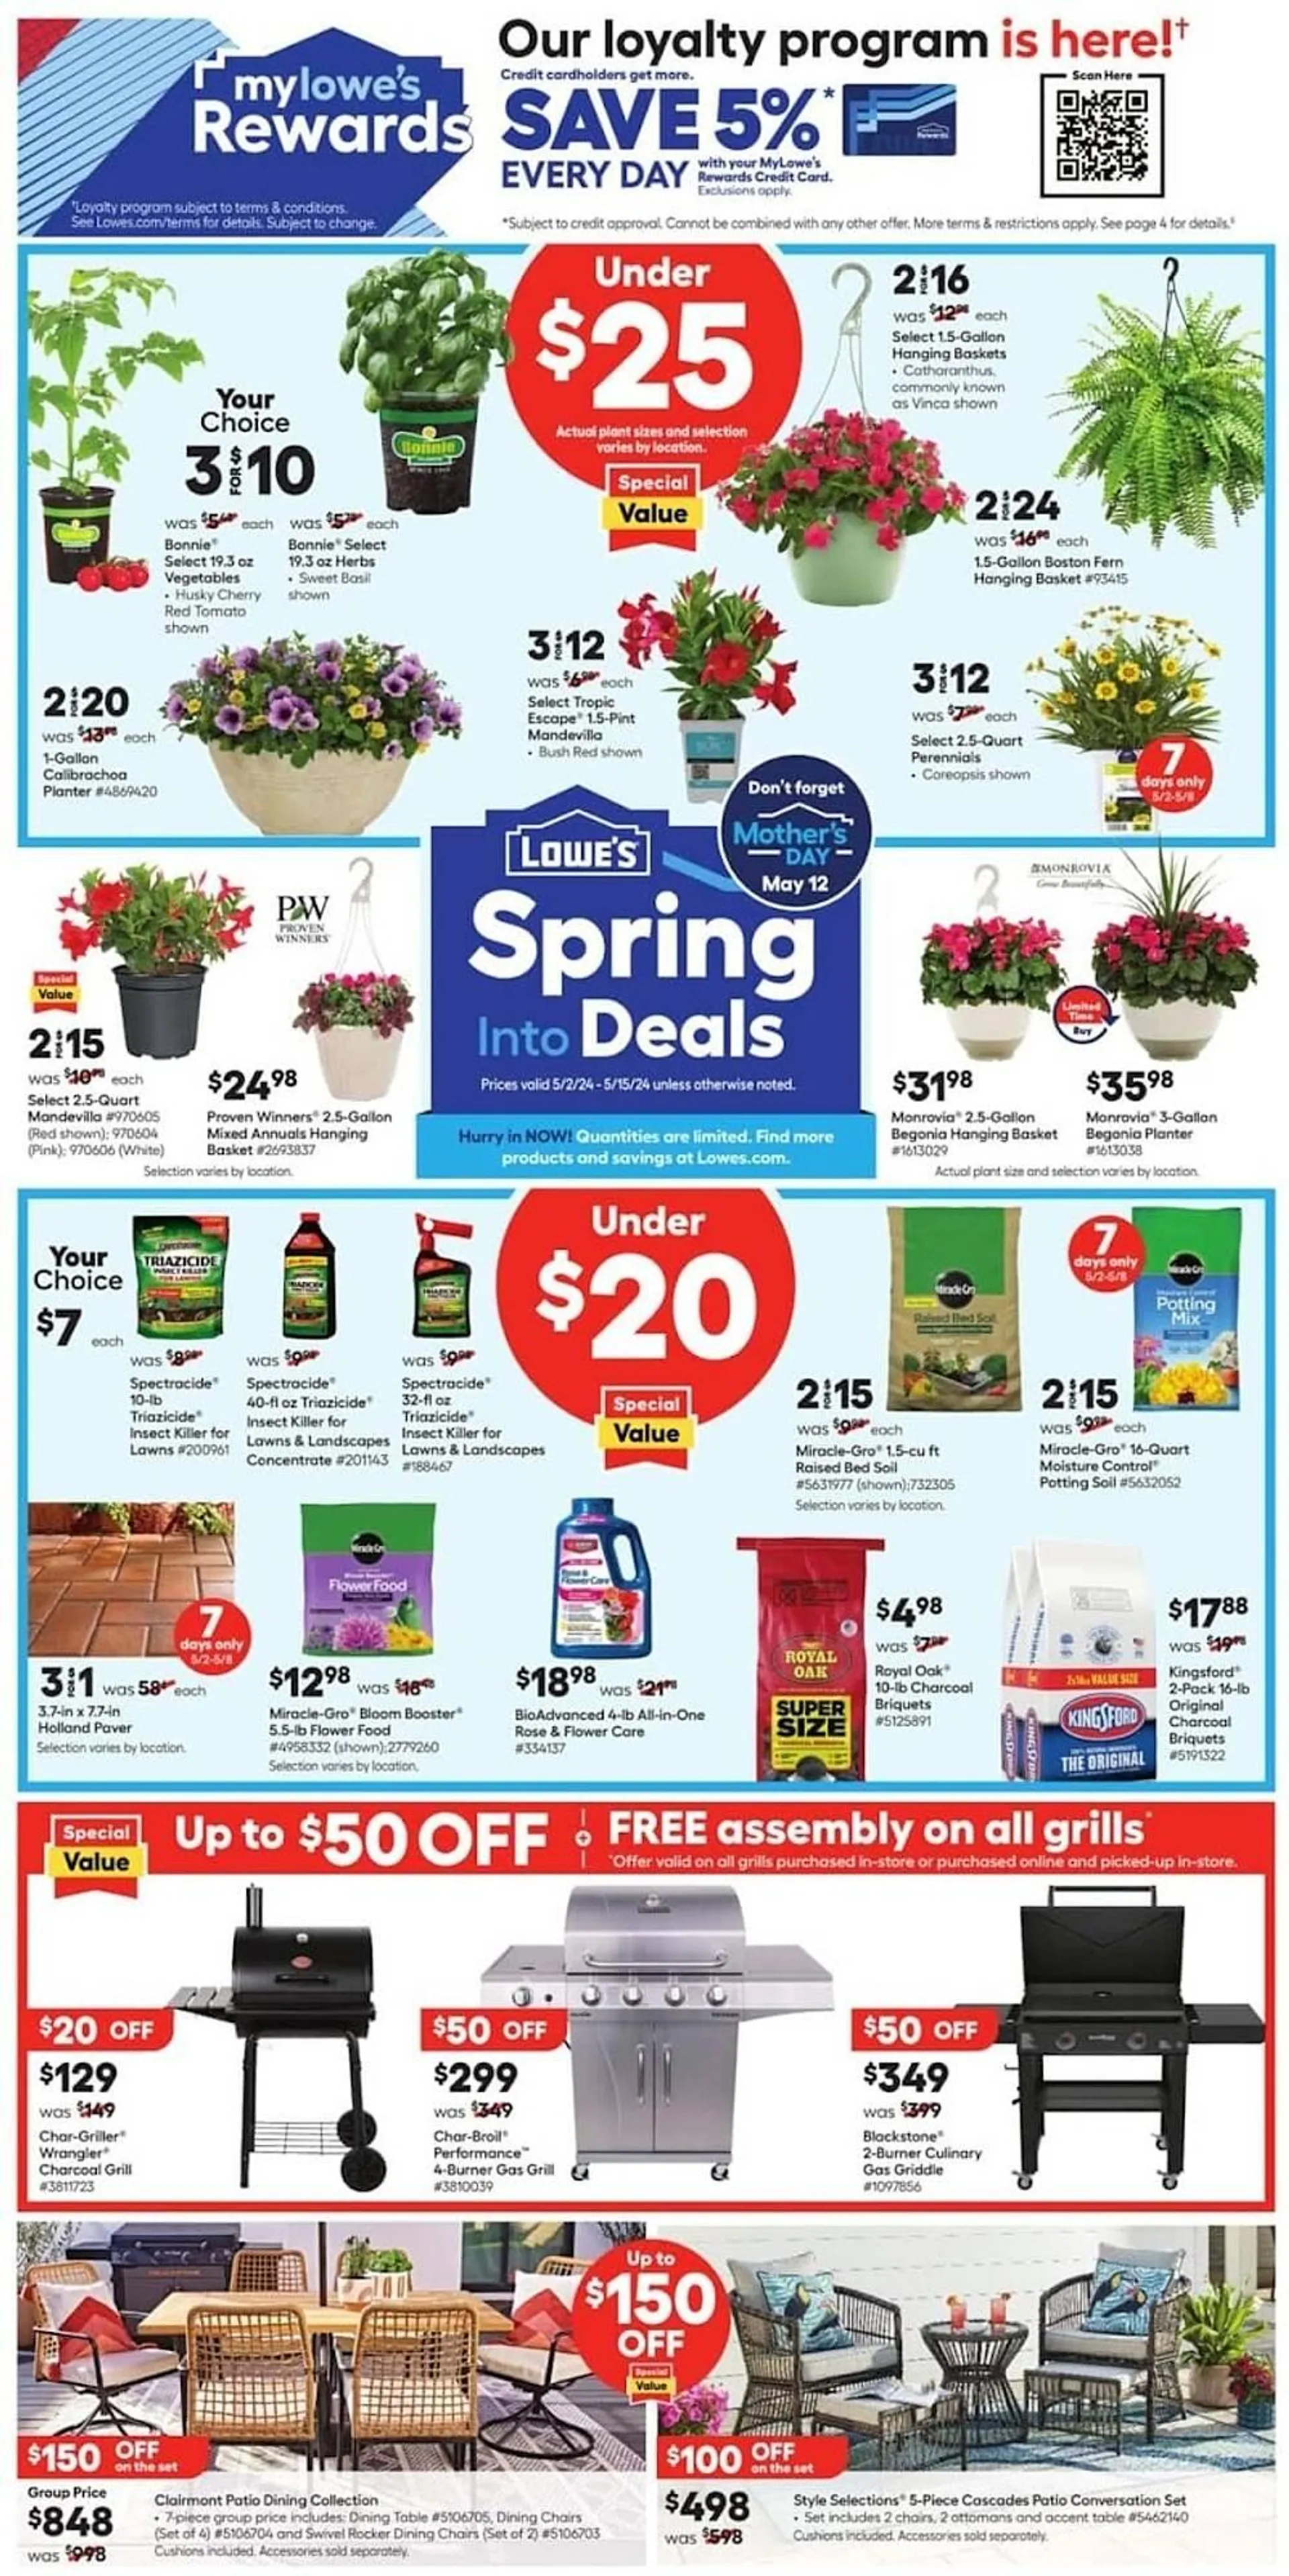 Lowes Foods Weekly Ad - 1